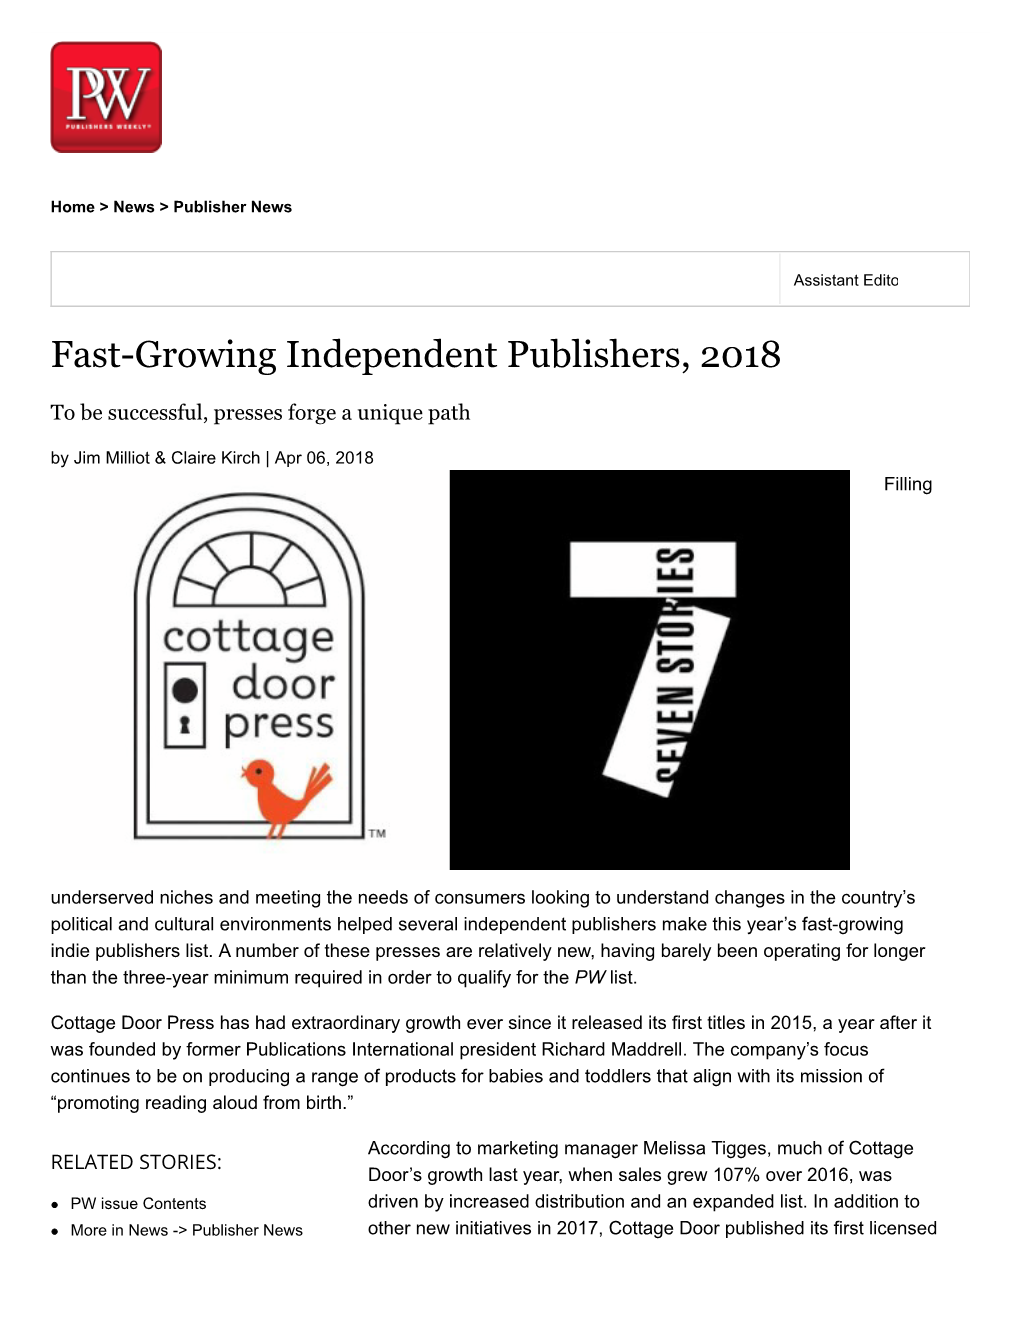 Fast-Growing Independent Publishers, 2018